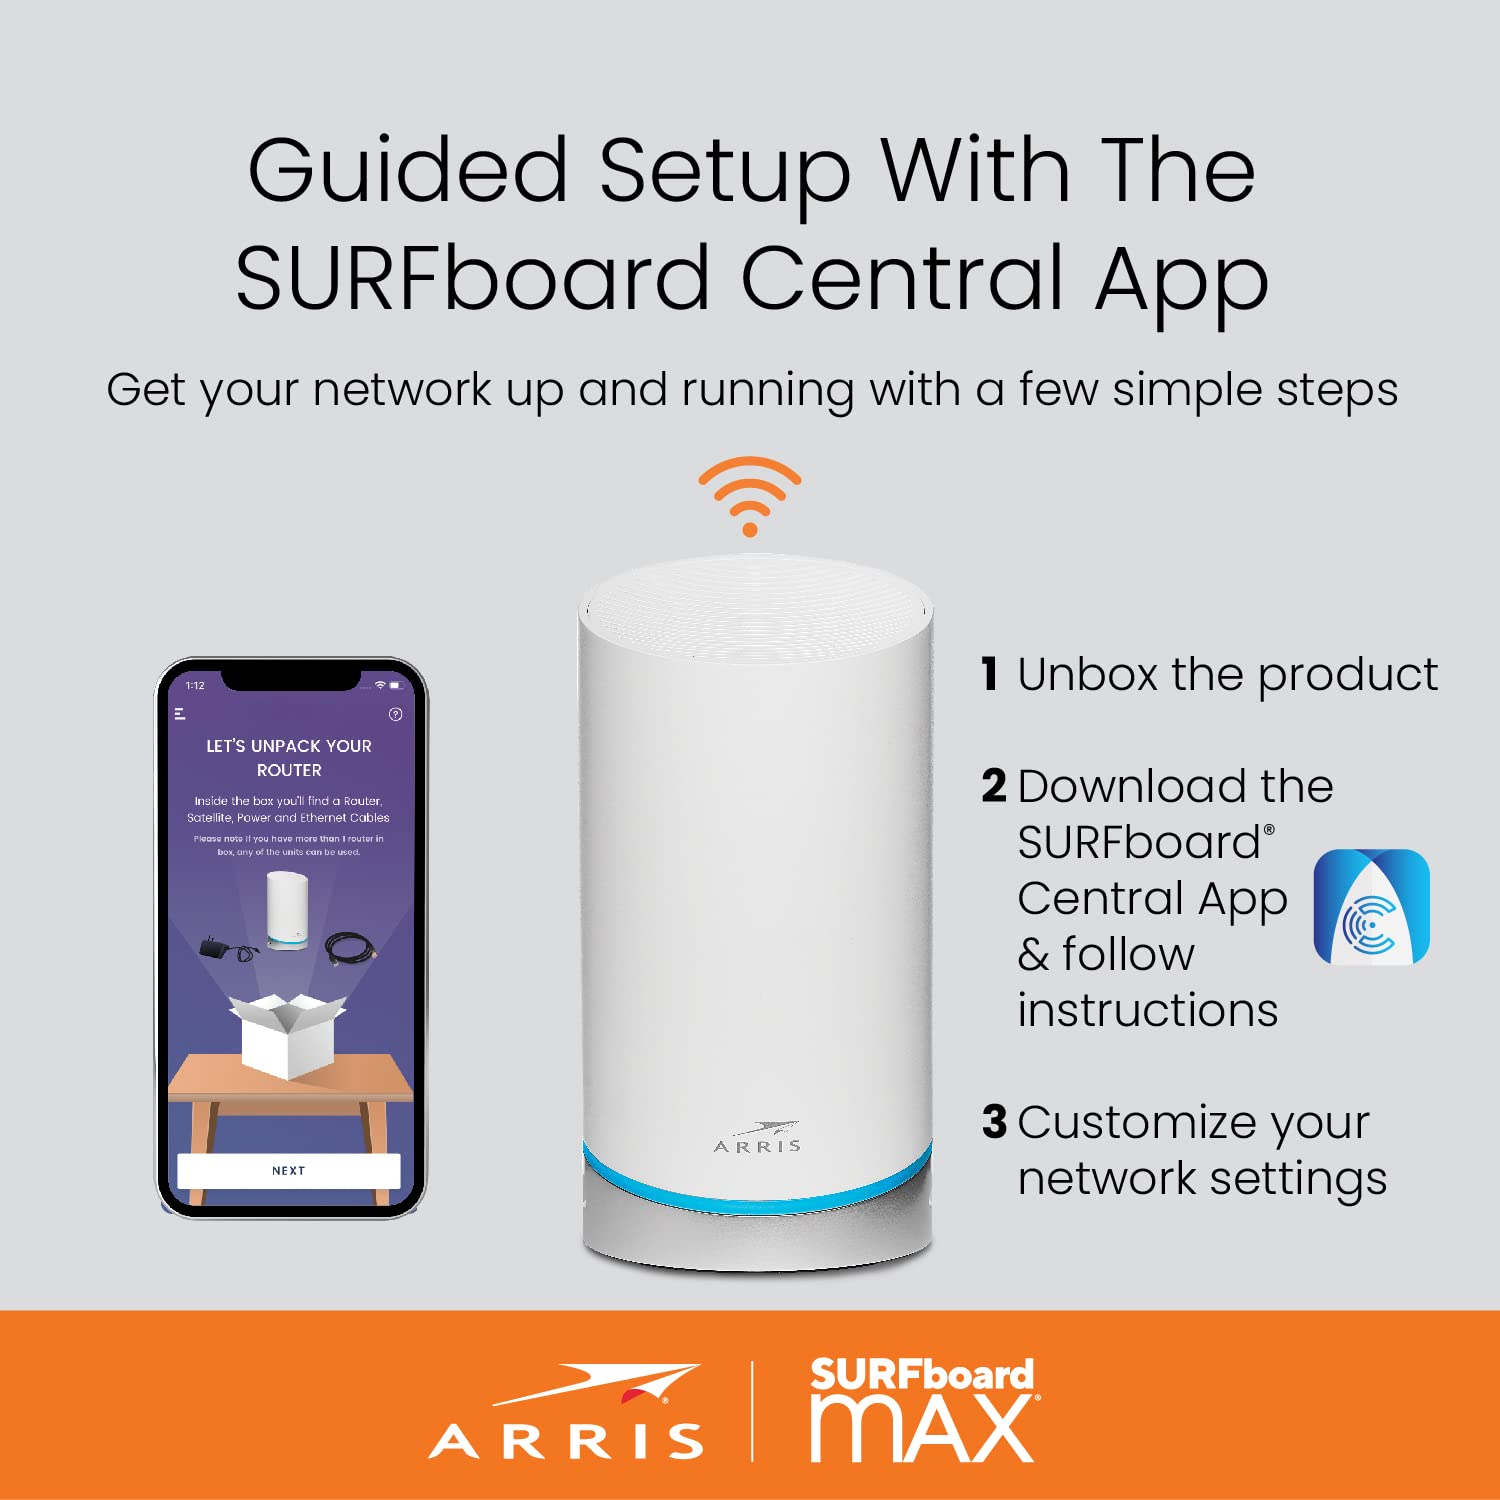 ARRIS Surfboard mAX W21 Tri-Band Mesh Ready Wi-Fi 6 Router | AX6600 Wi-Fi Speeds up to 6.6 Gbps | Coverage up to 2,750 sq ft | 1 Router | Two 1 Gbps Ports | Alexa Support | 2 Year Warranty